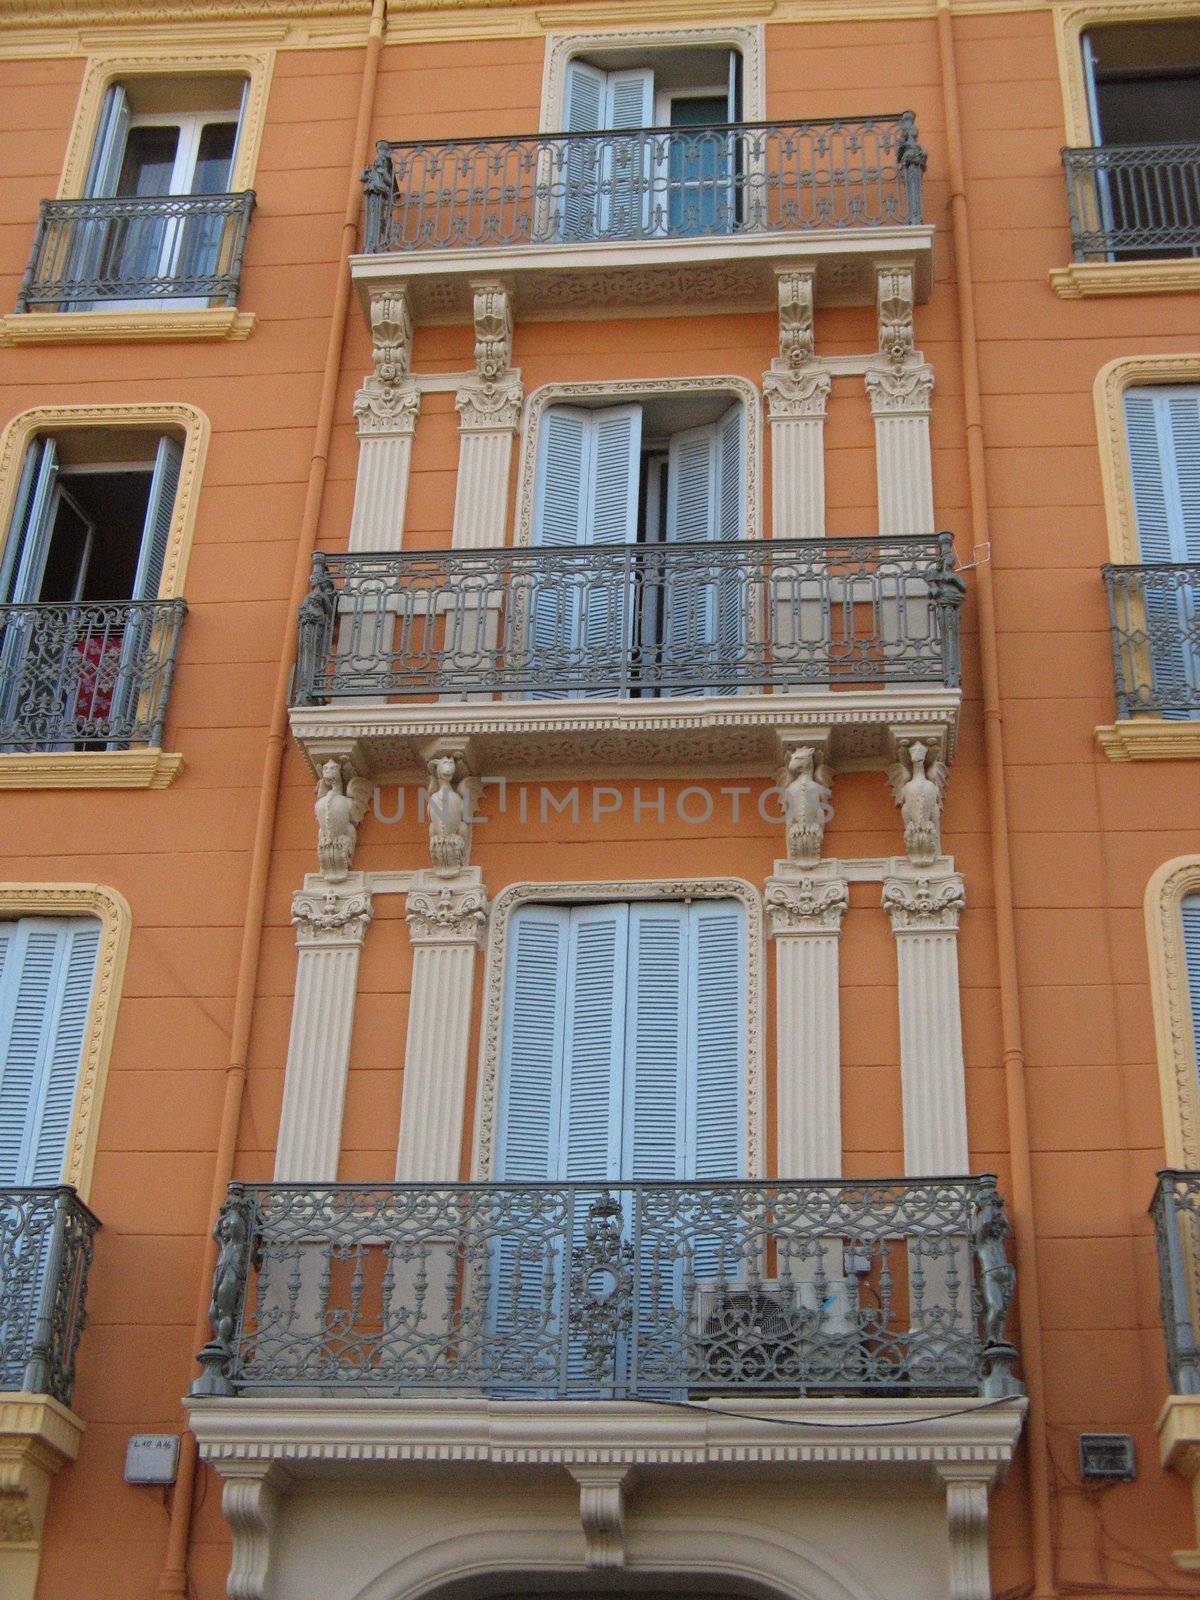 frontage of an old building in Provence